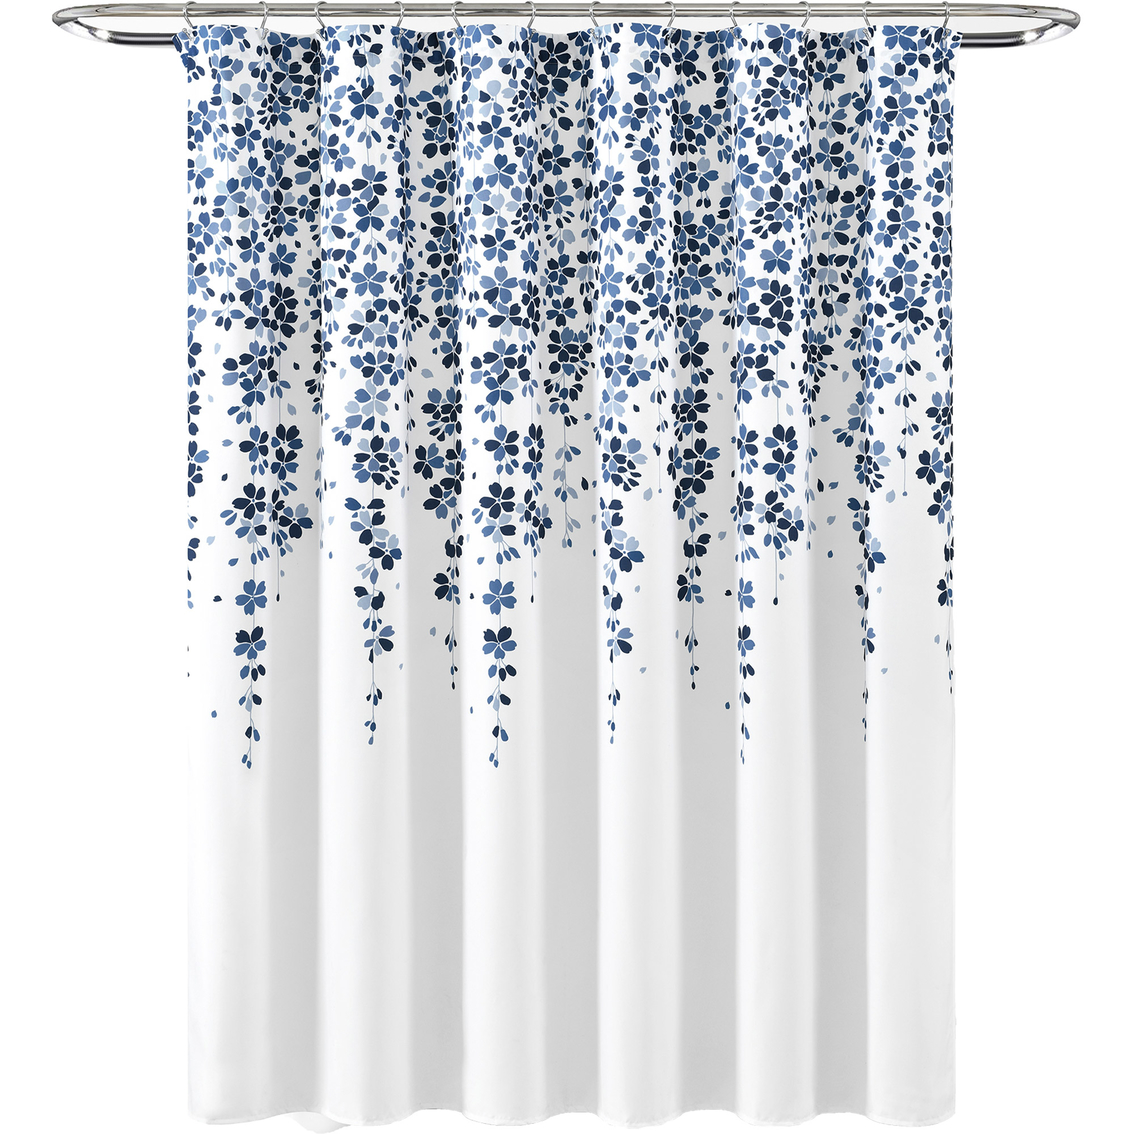 Lush Decor Weeping Flower Shower Curtain 72 x 72 - Image 5 of 6